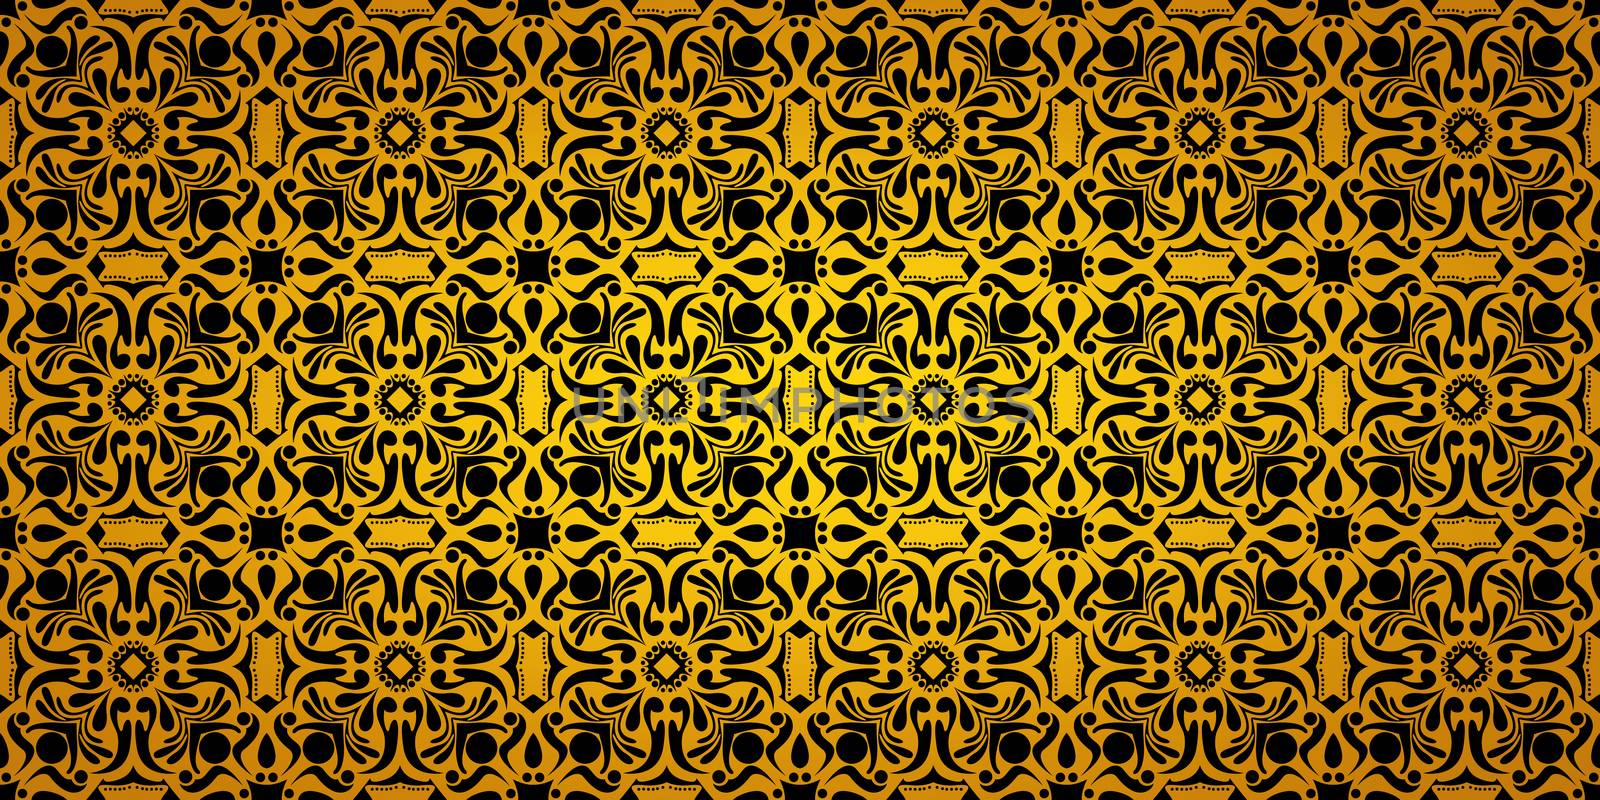 Seamless wide gradient pattern black and gold vintage floral bac by asiandelight